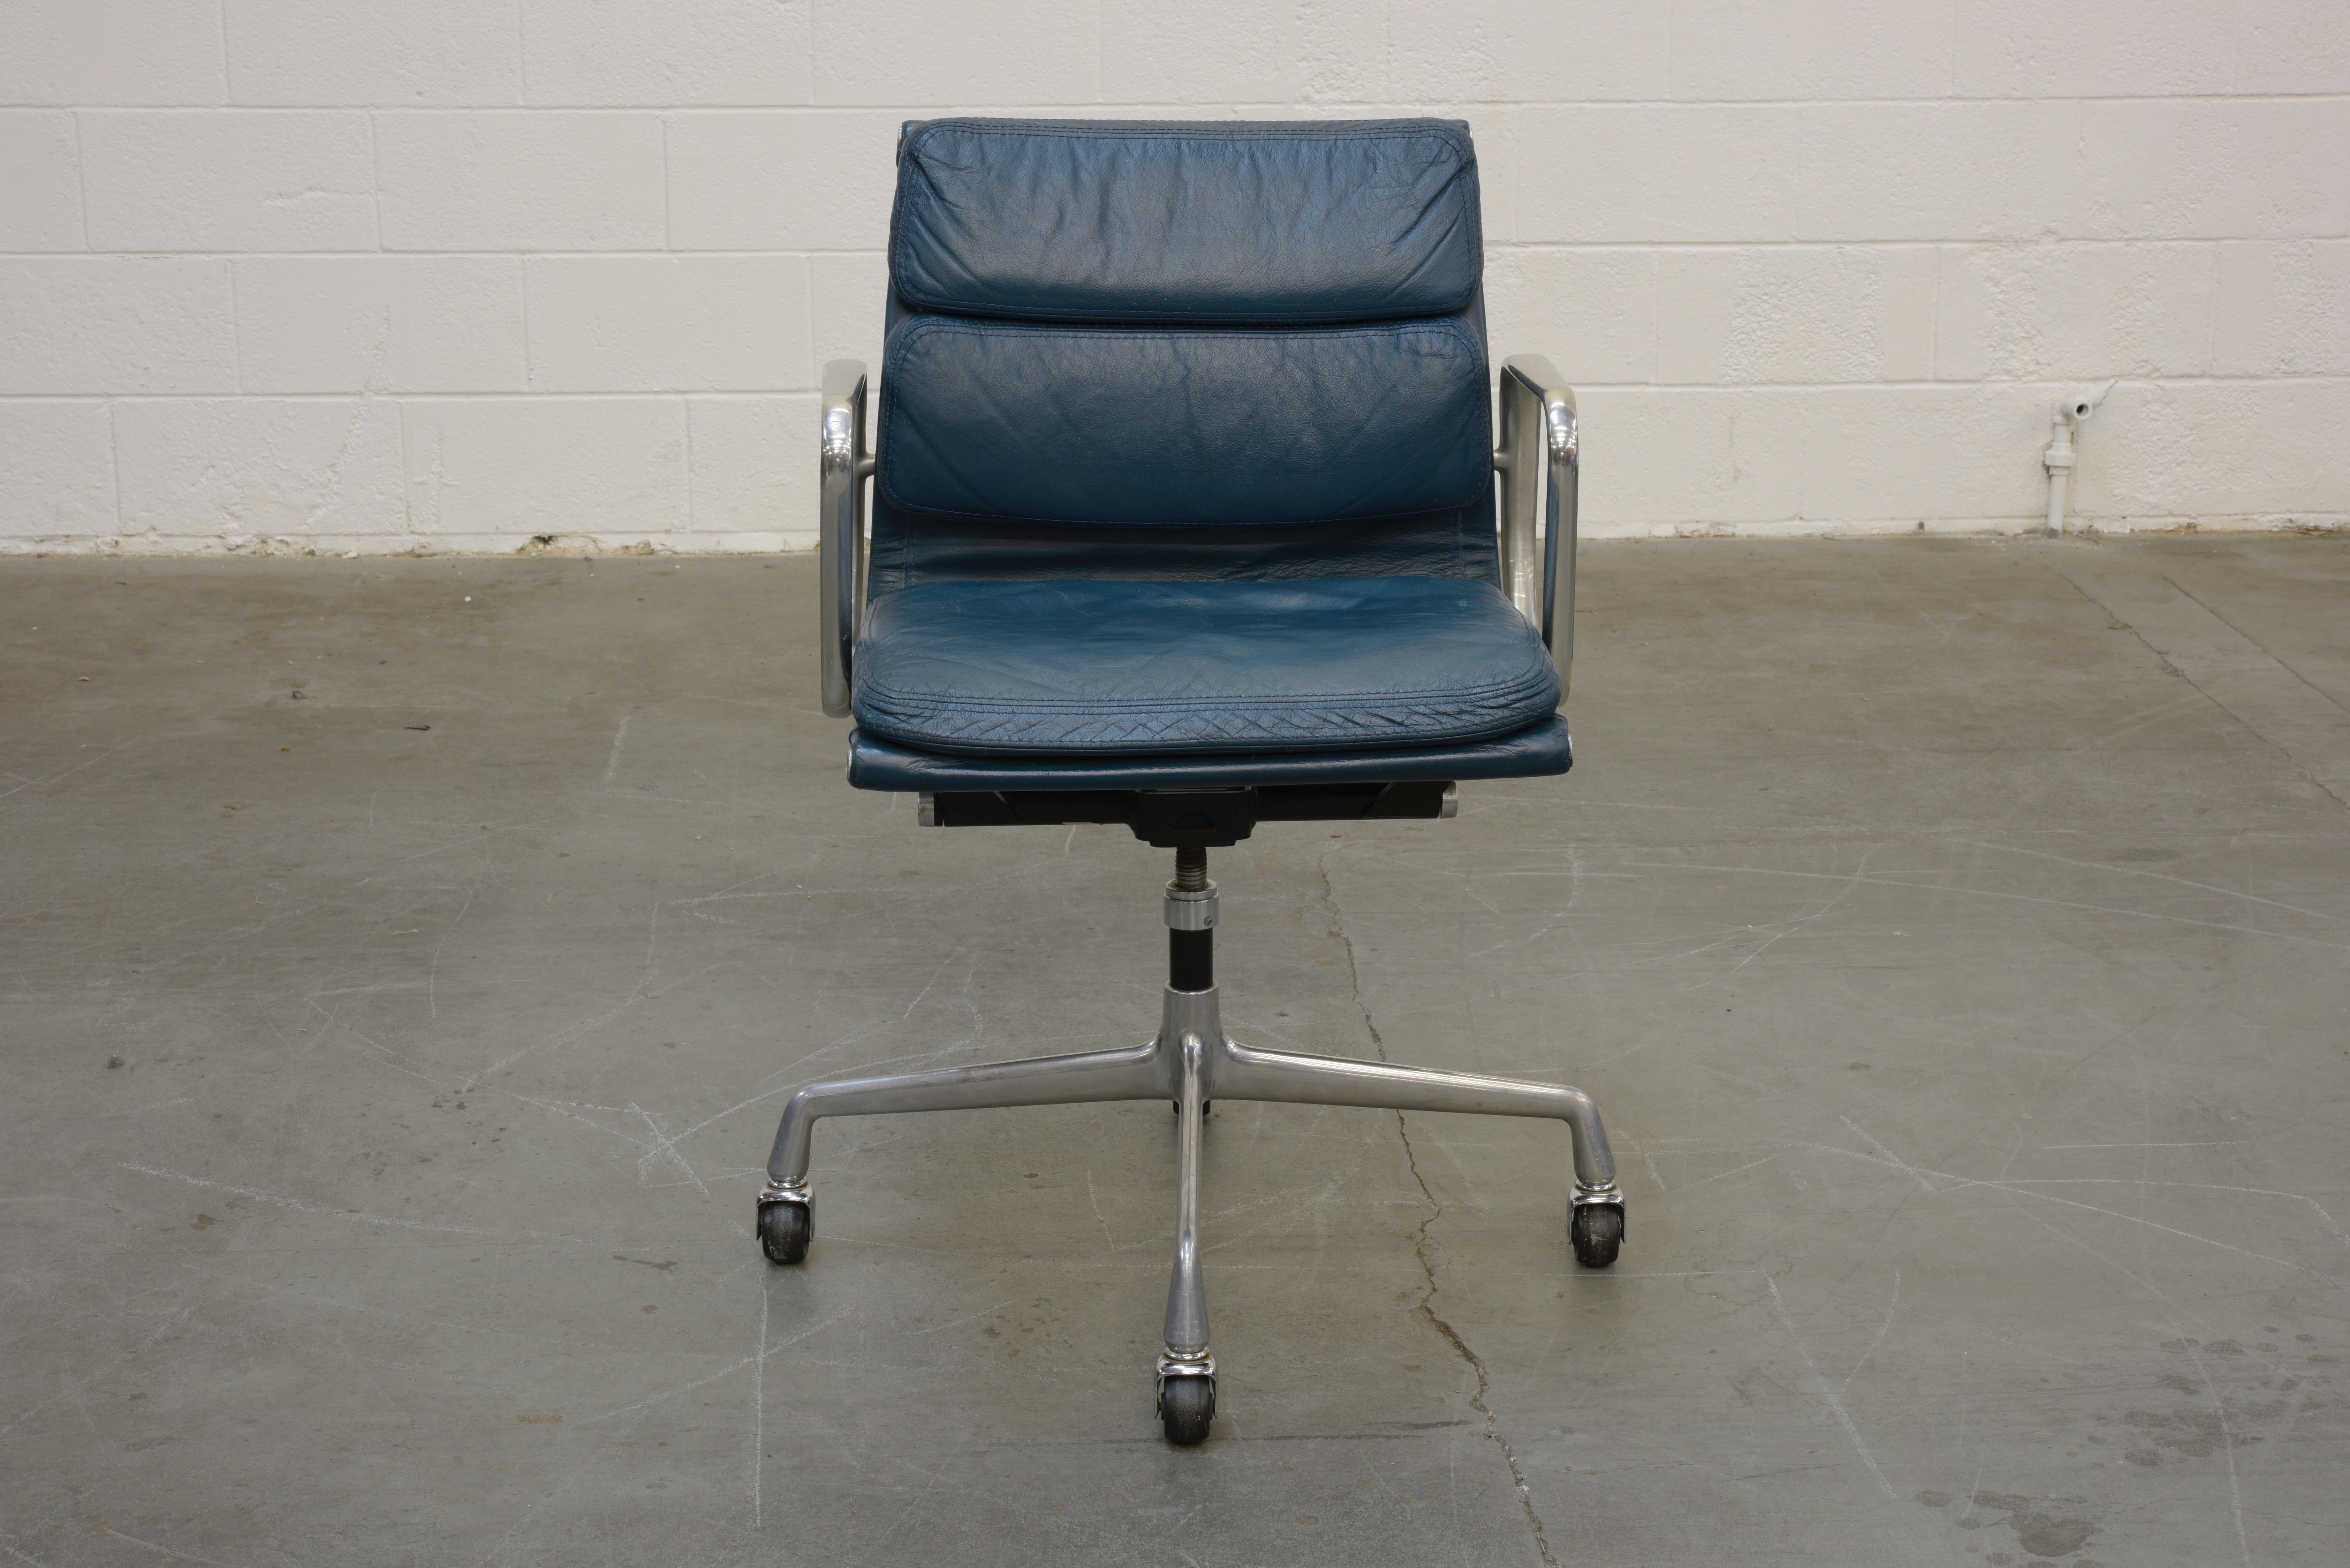 A collectible and sought after Early Production blue leather 'Soft Pad' management desk chair from the Aluminum Group line, designed by Charles and Ray Eames for Herman Miller. Featuring its original ocean blue color leather upholstery over original